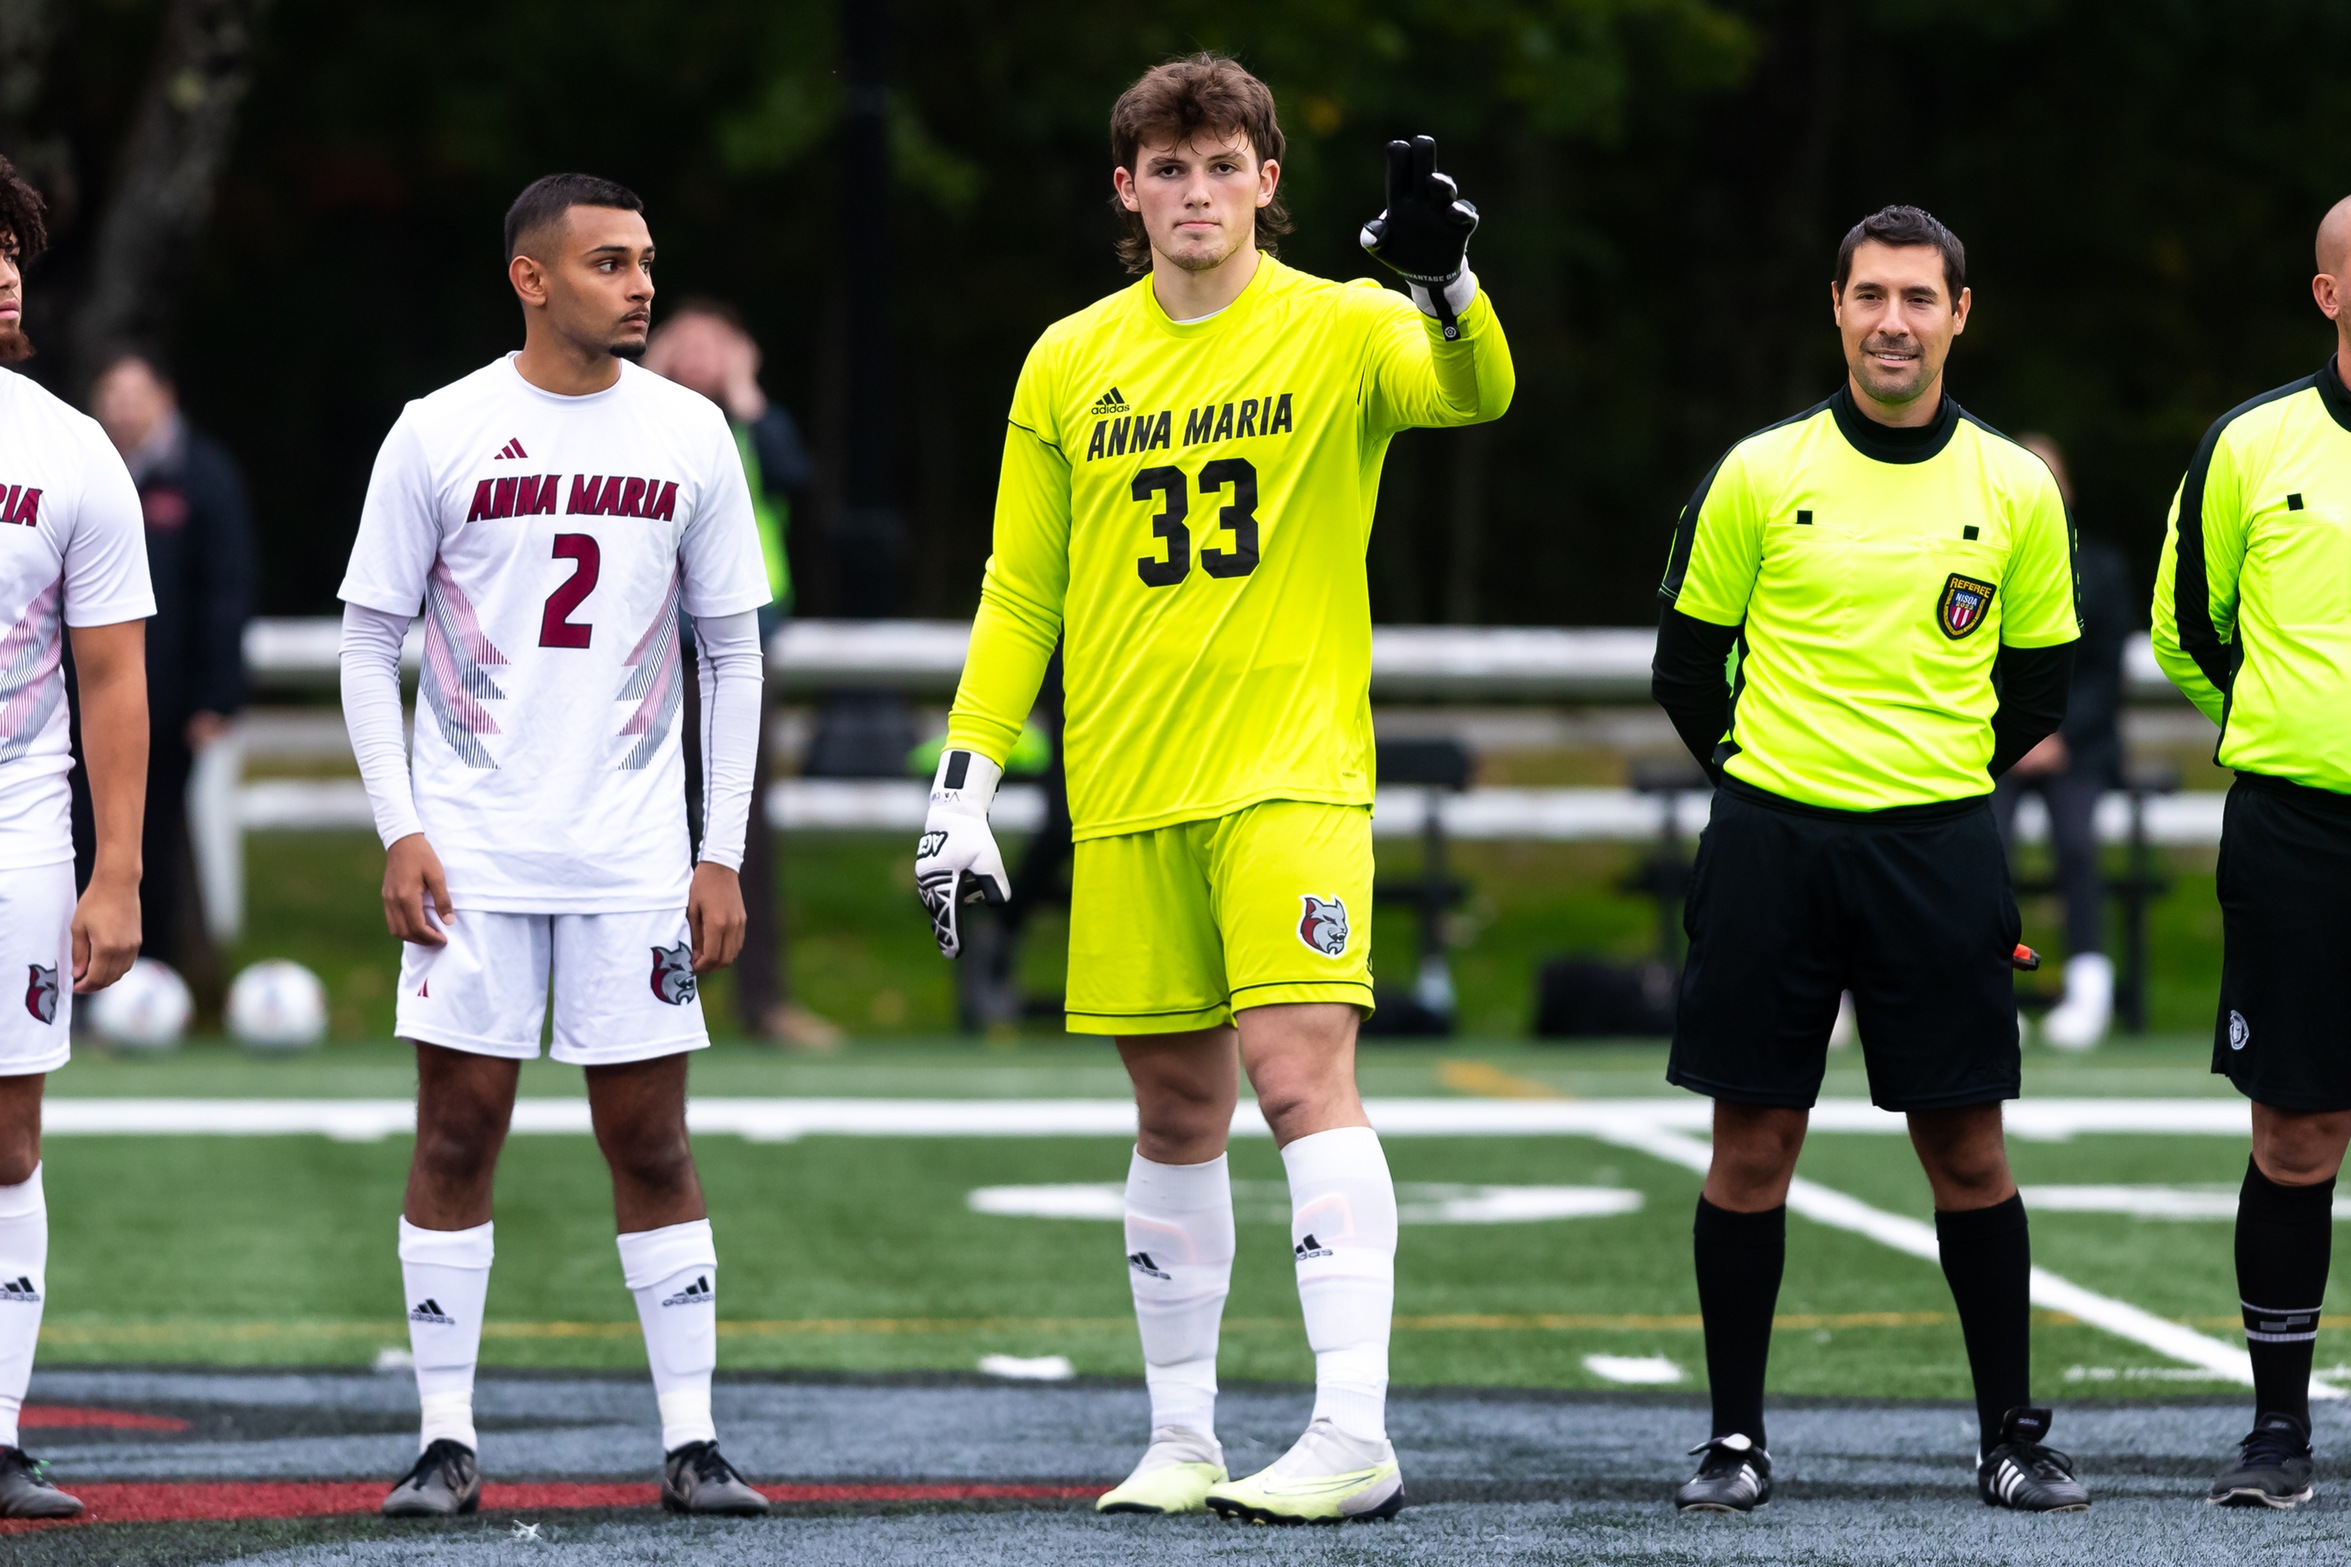 Men’s Soccer Closes Out Regular Season With 4-0 Loss To Bluejays